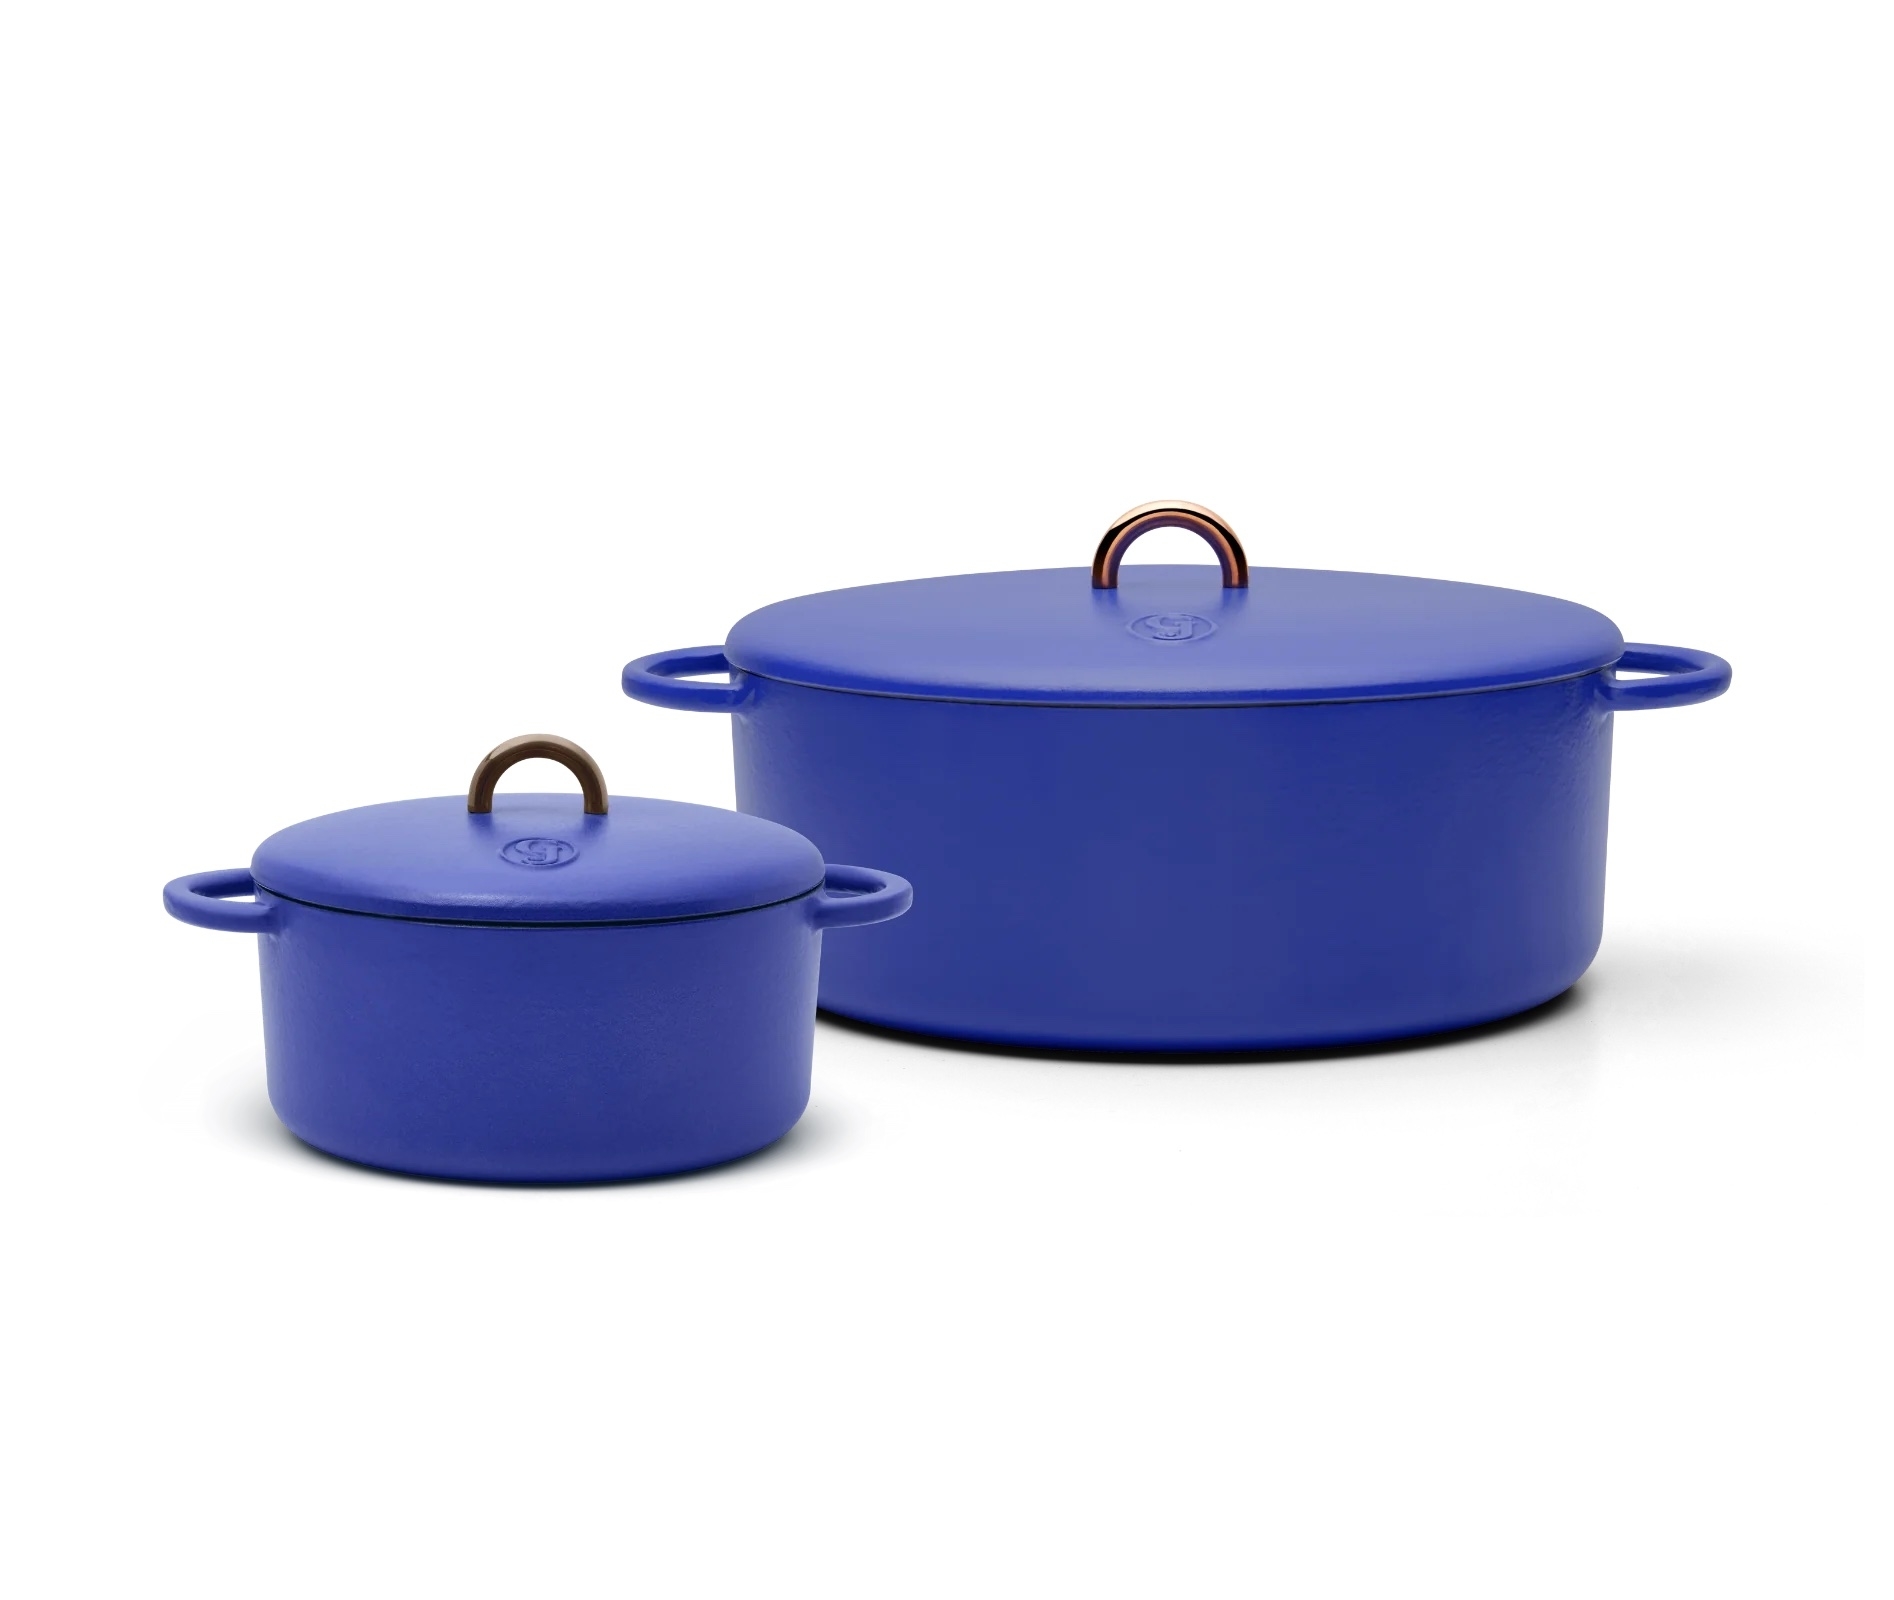 Two blue enamel-coated cast iron cookware pieces with lids